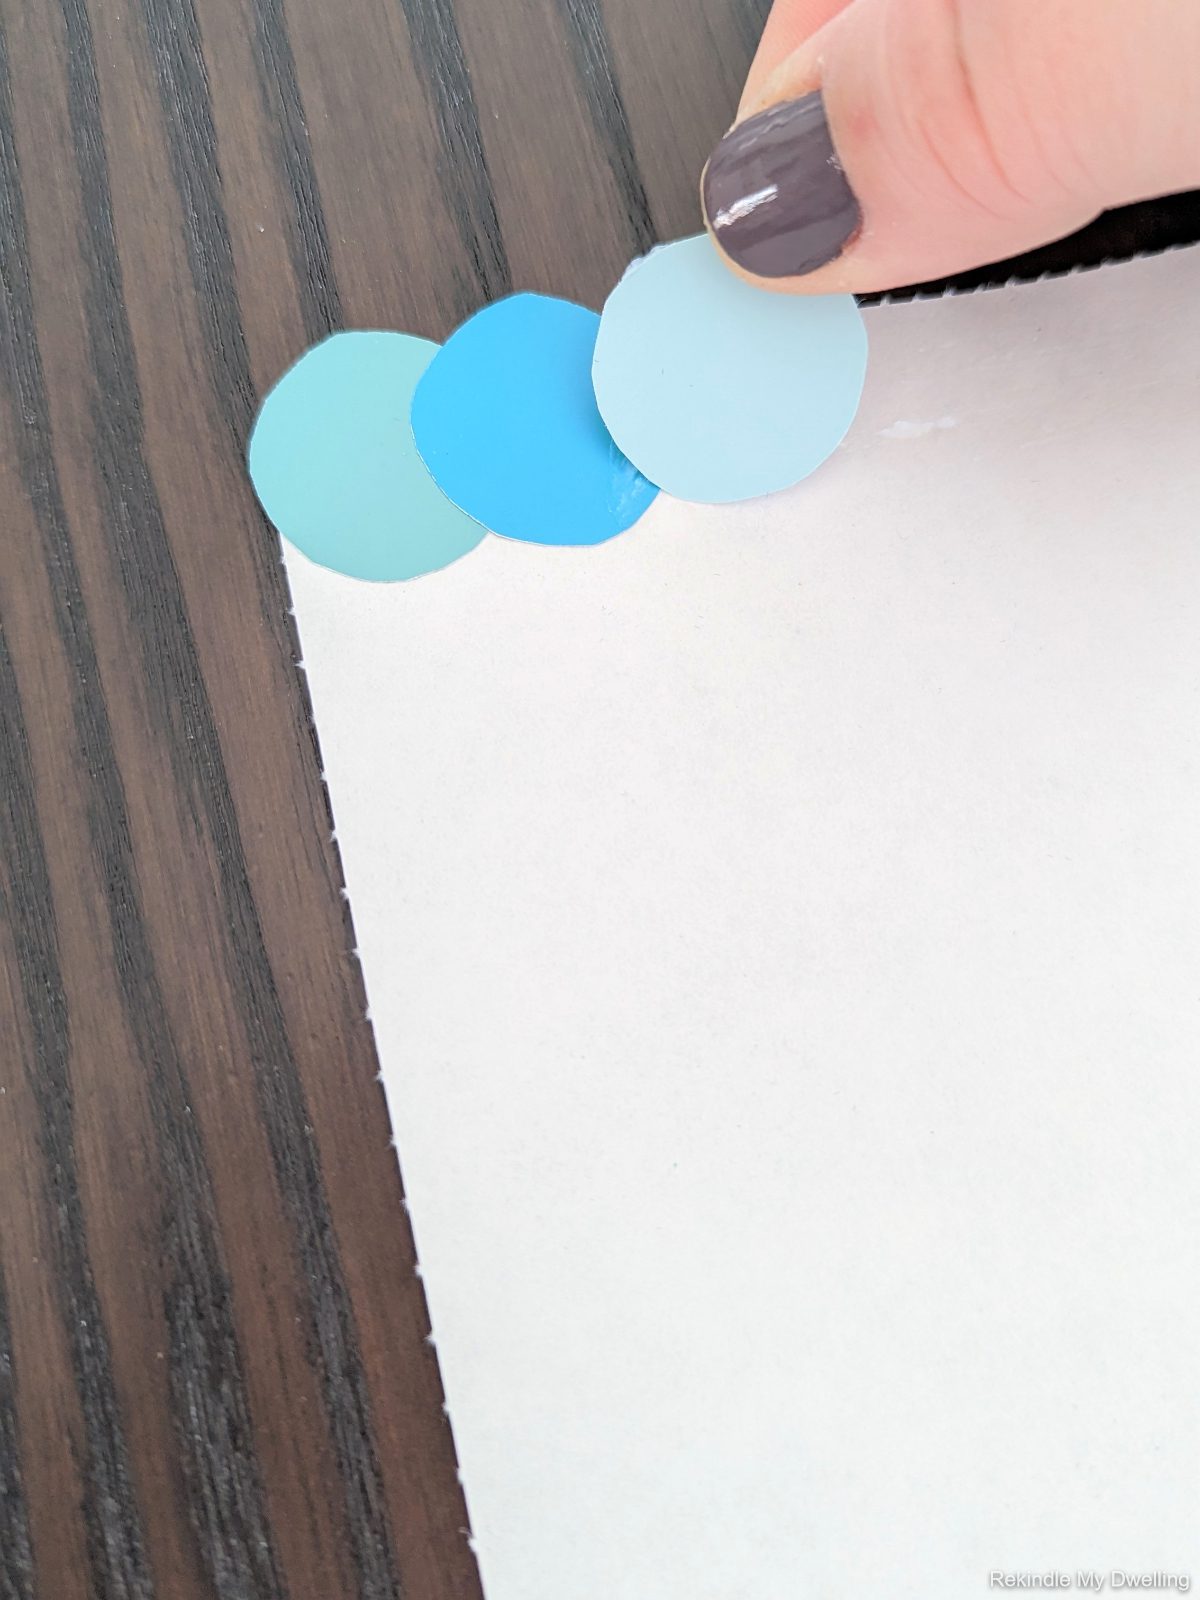 Gluing round paint chips onto a paper.